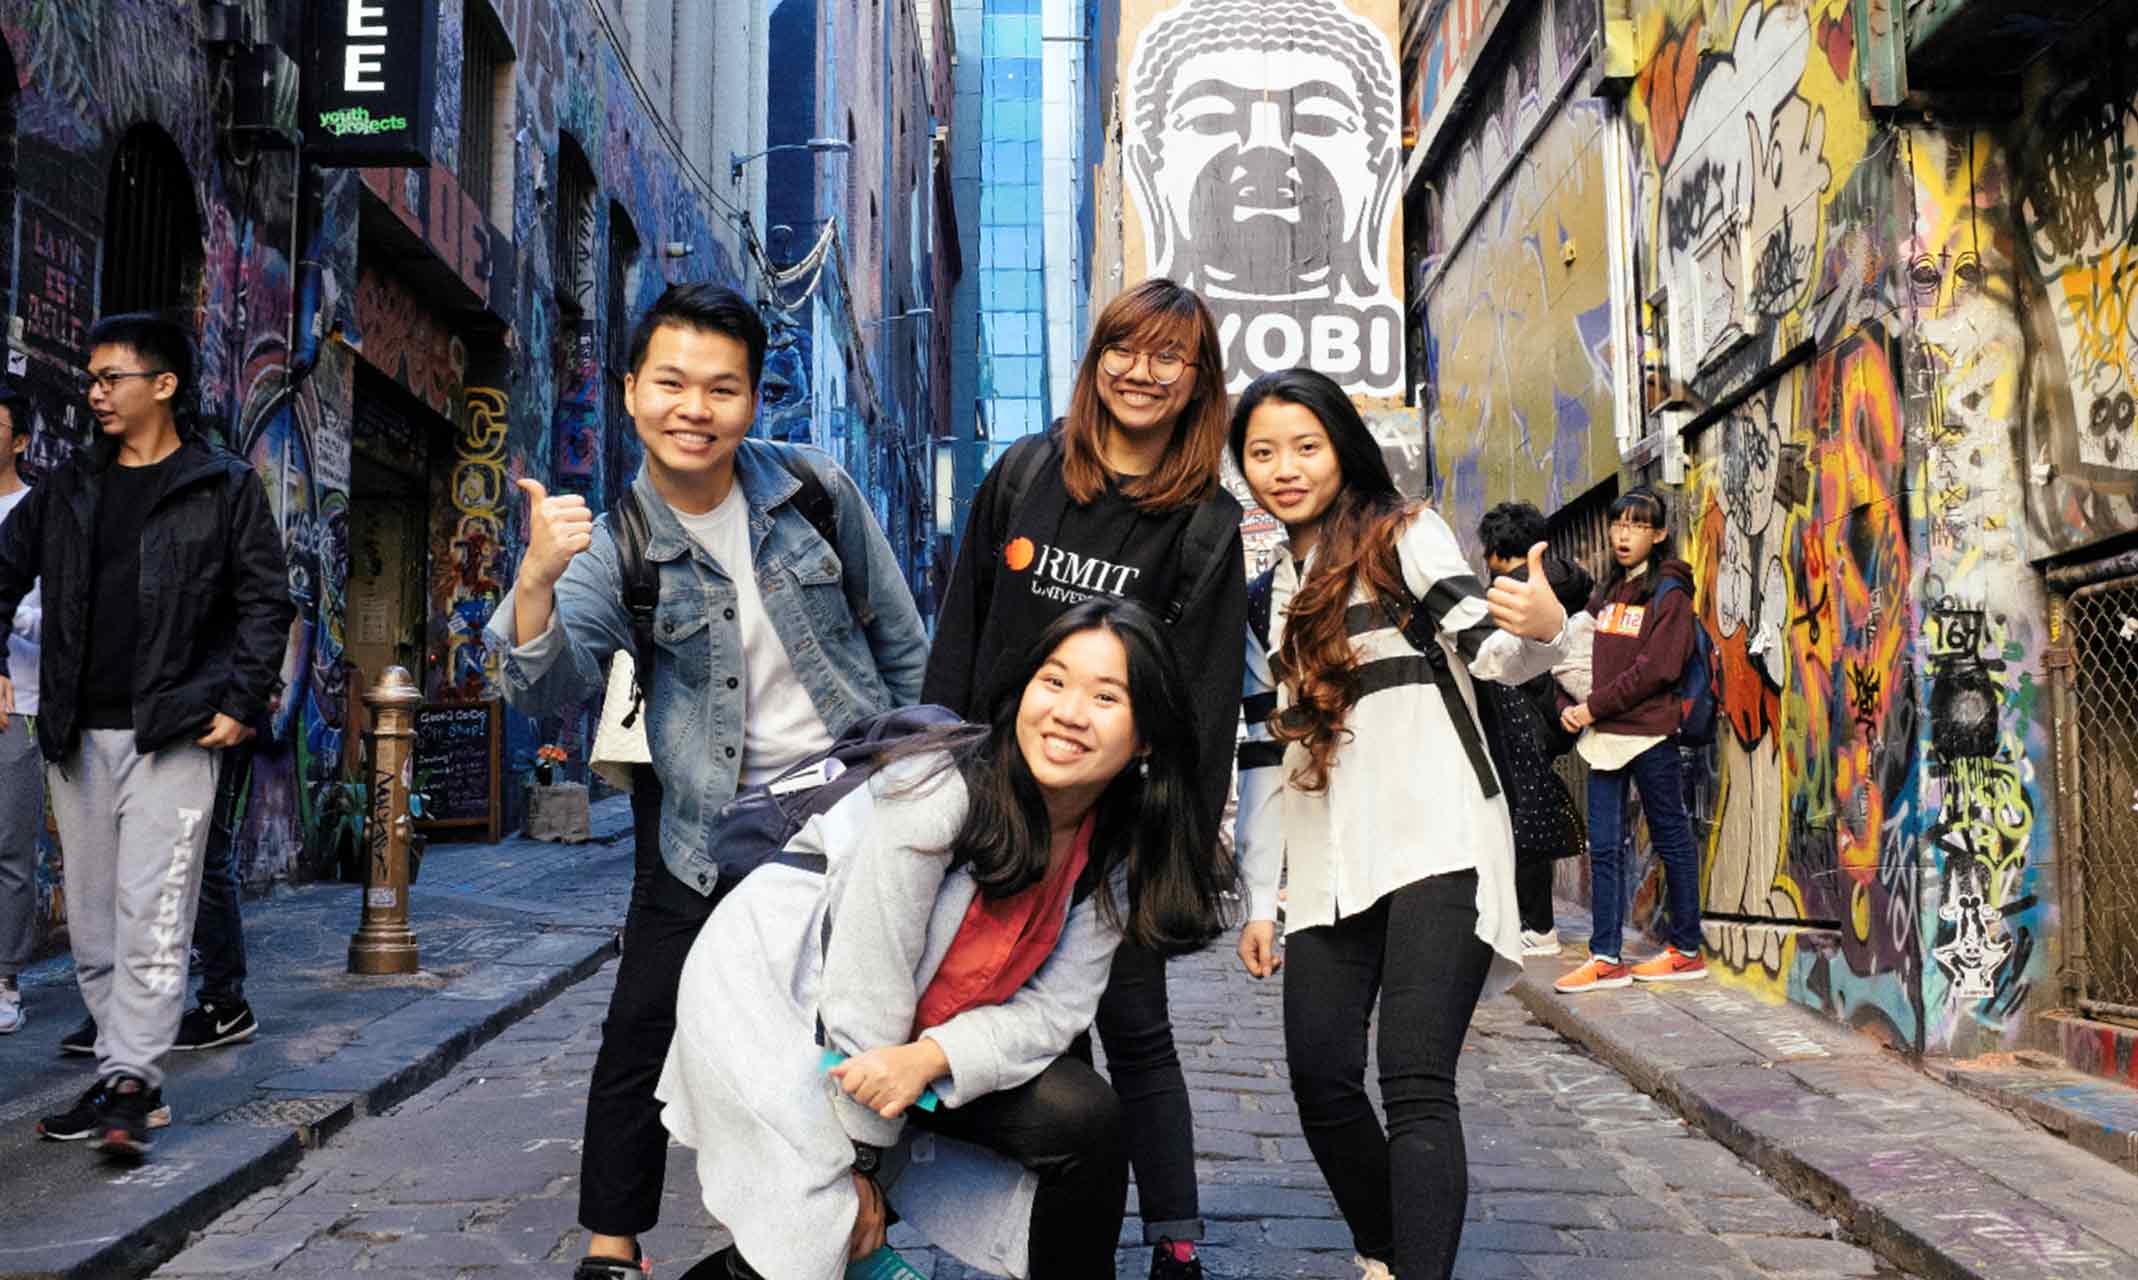 Students standing in classic Melbourne laneway